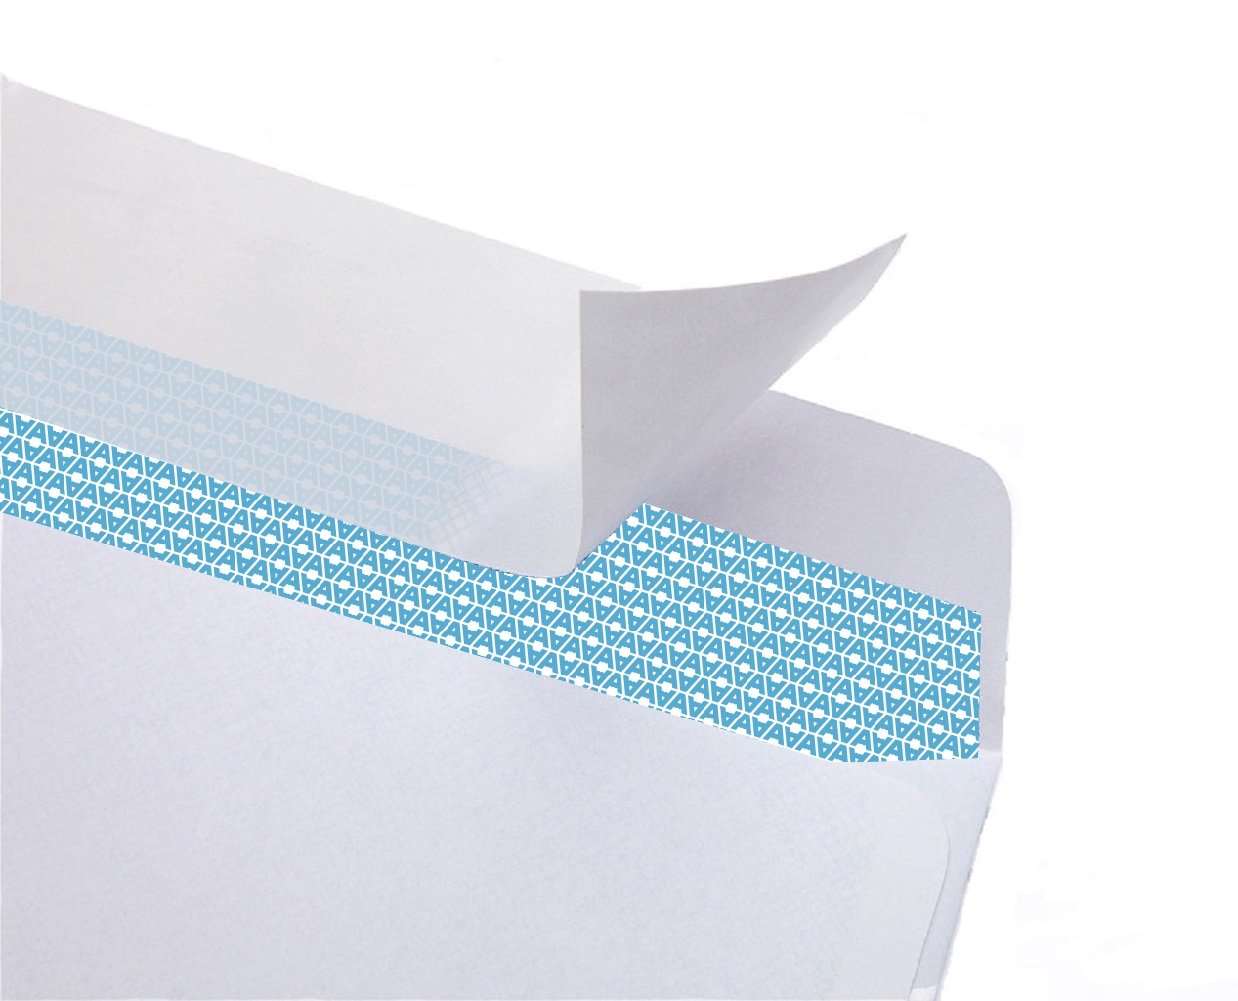 #10 Security Tinted Self-Seal Envelopes - No Window - EnveGuard, Size 4-1/8 X 9-1/2 Inches - White - 24 LB - 100 Count (34100)